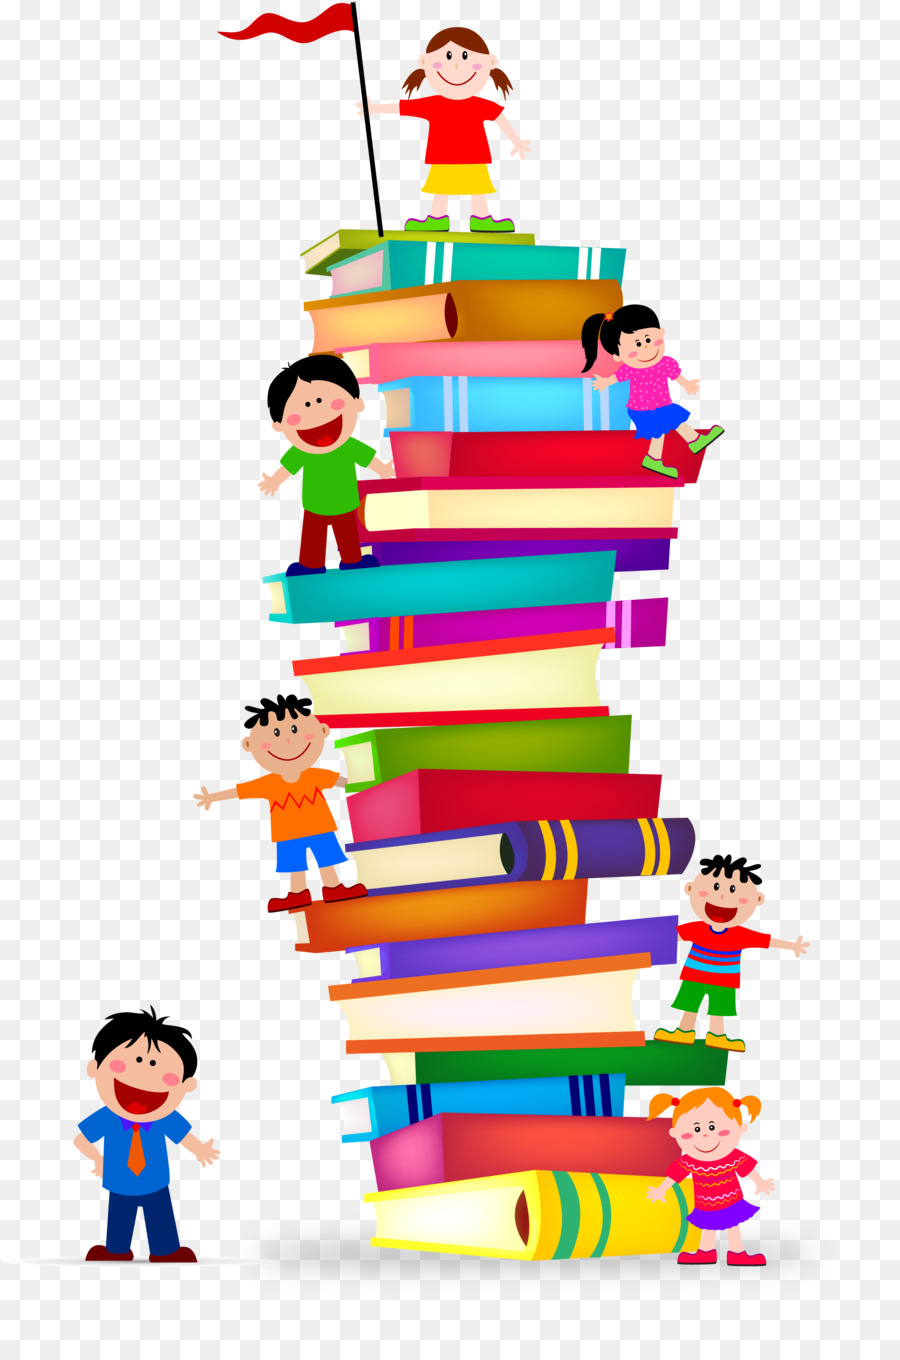 kisspng book library stack clip art books child 5adc900b7b5209.3772607115244042355051